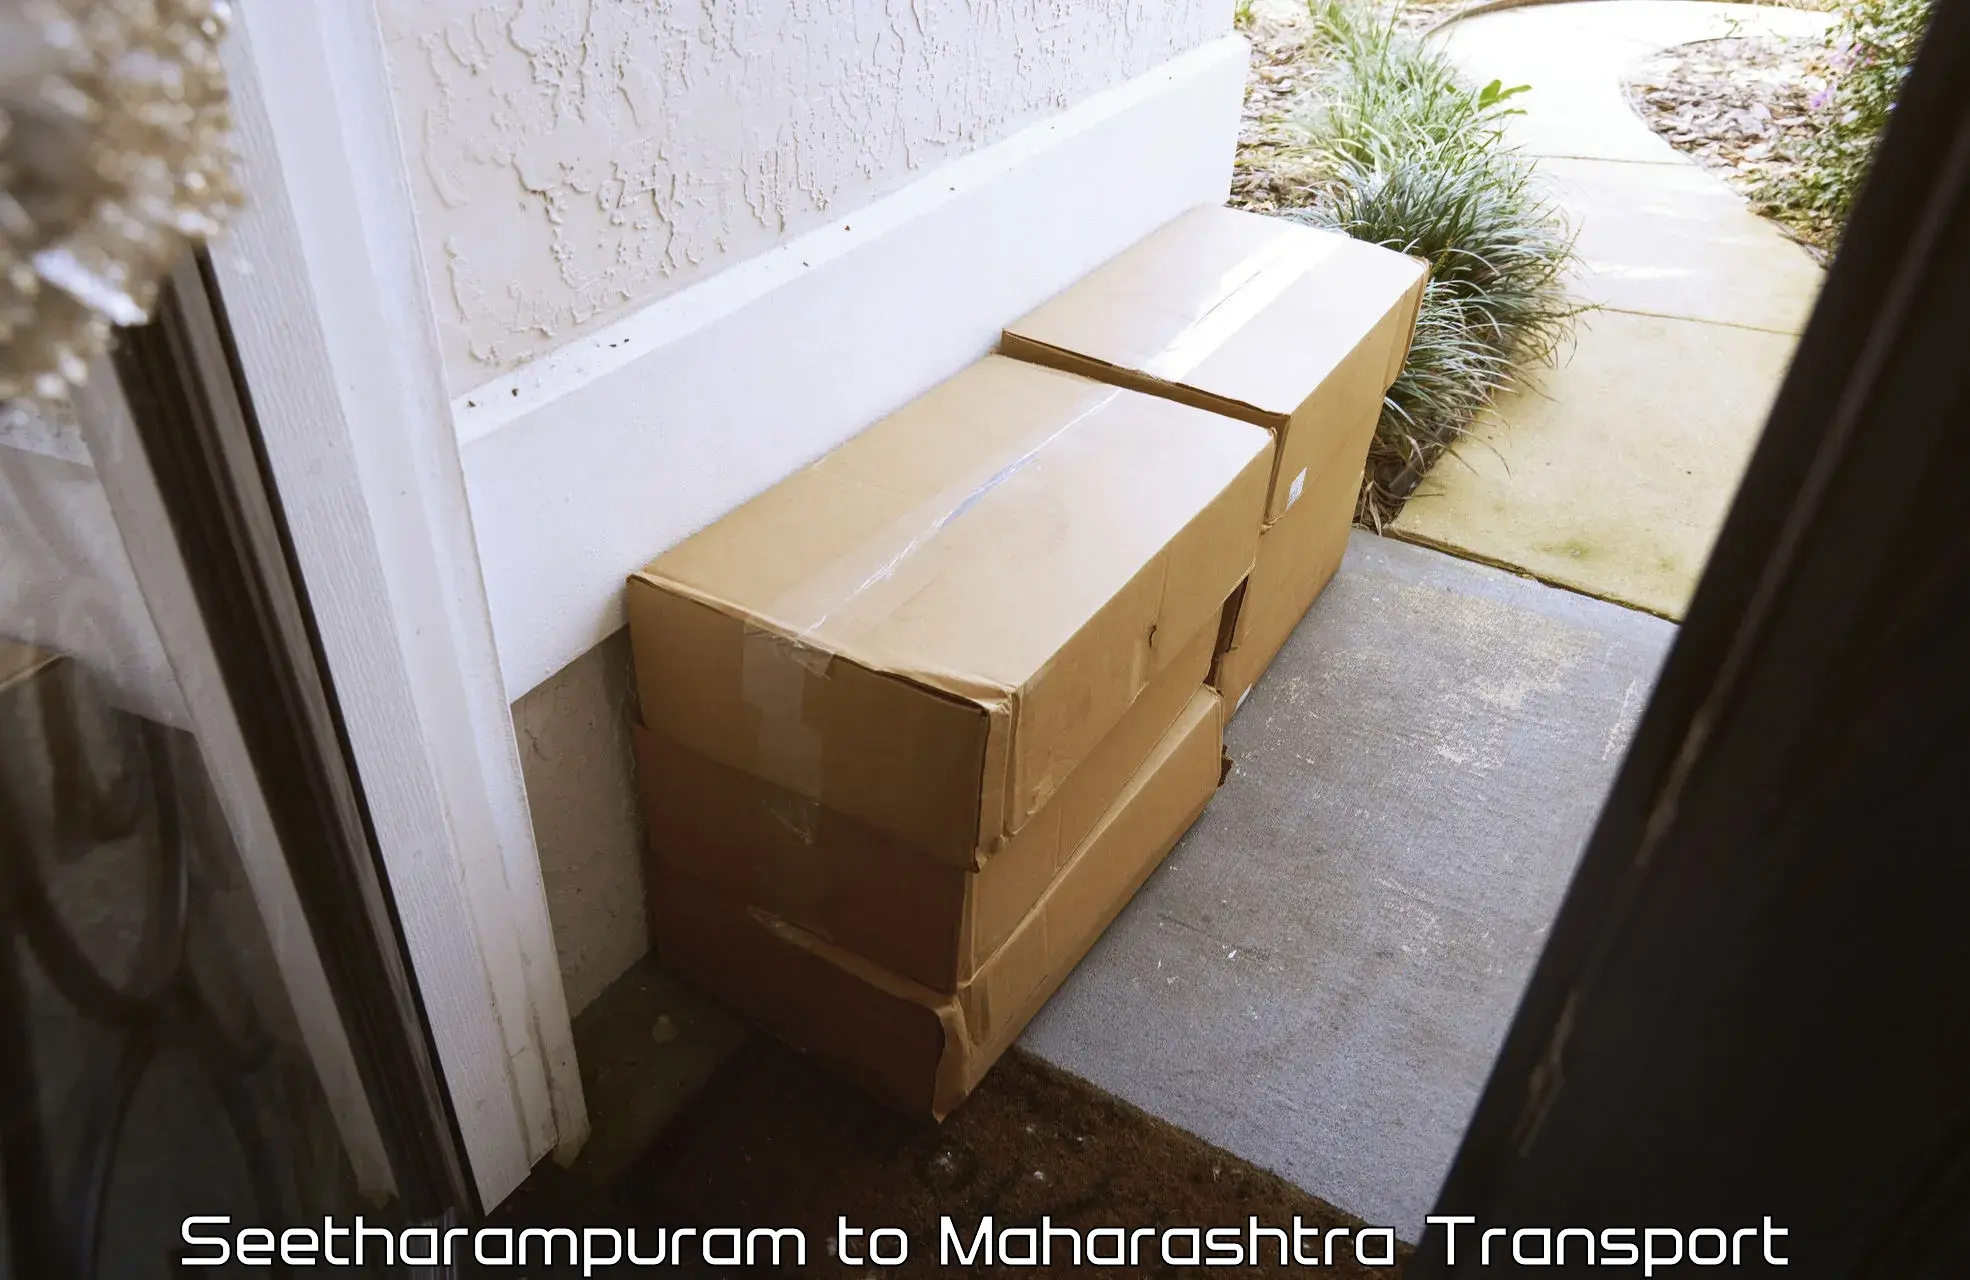 Transport bike from one state to another Seetharampuram to Maharashtra